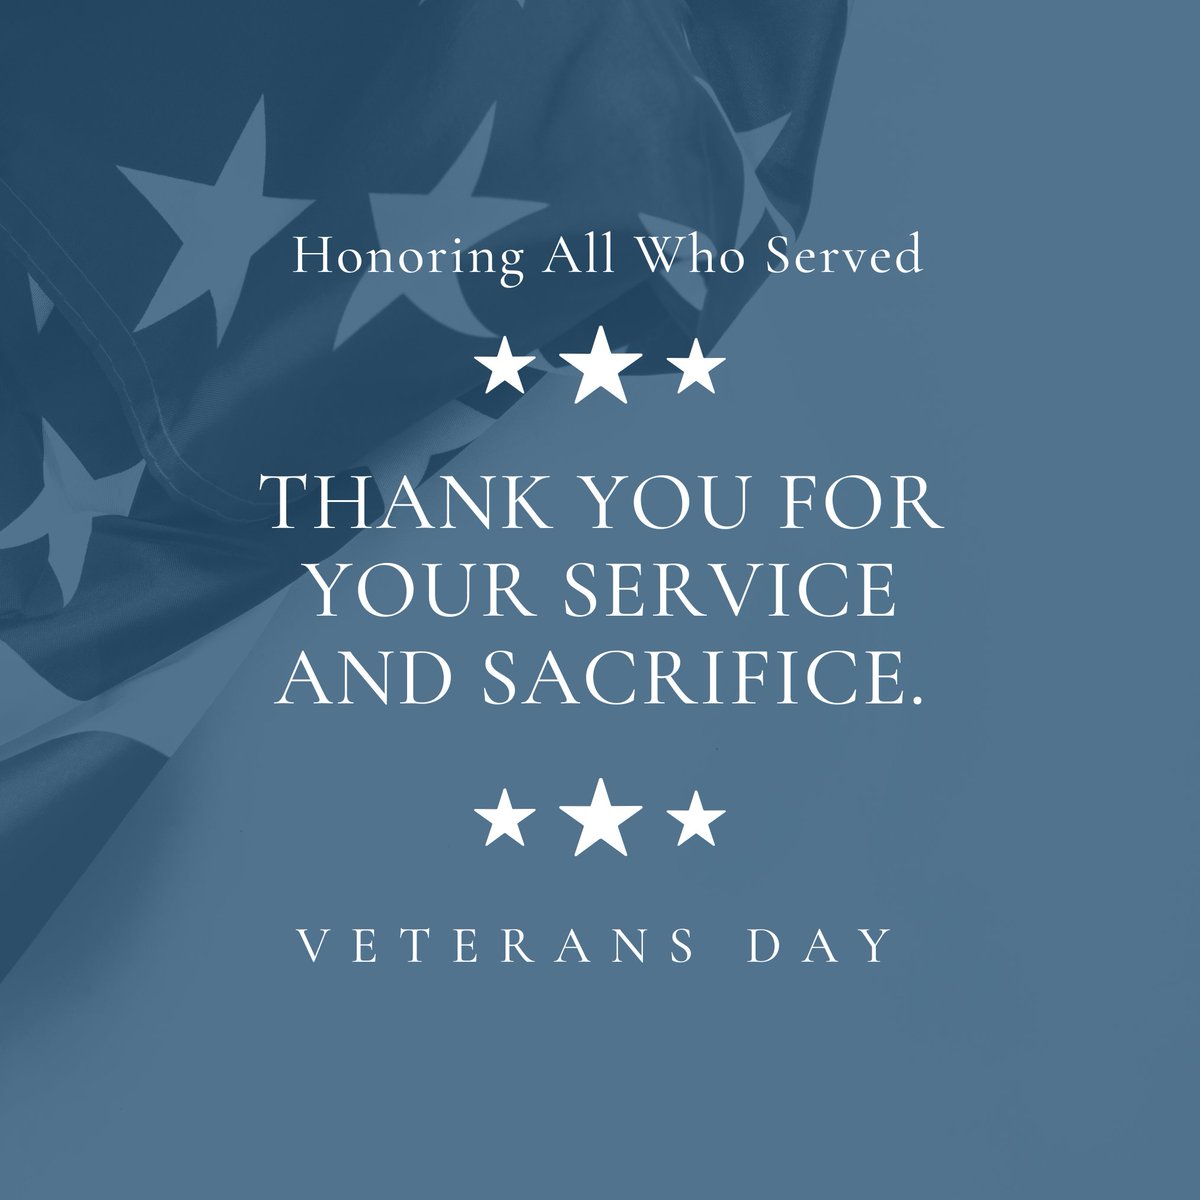 Veterans, we honor you today and every day.